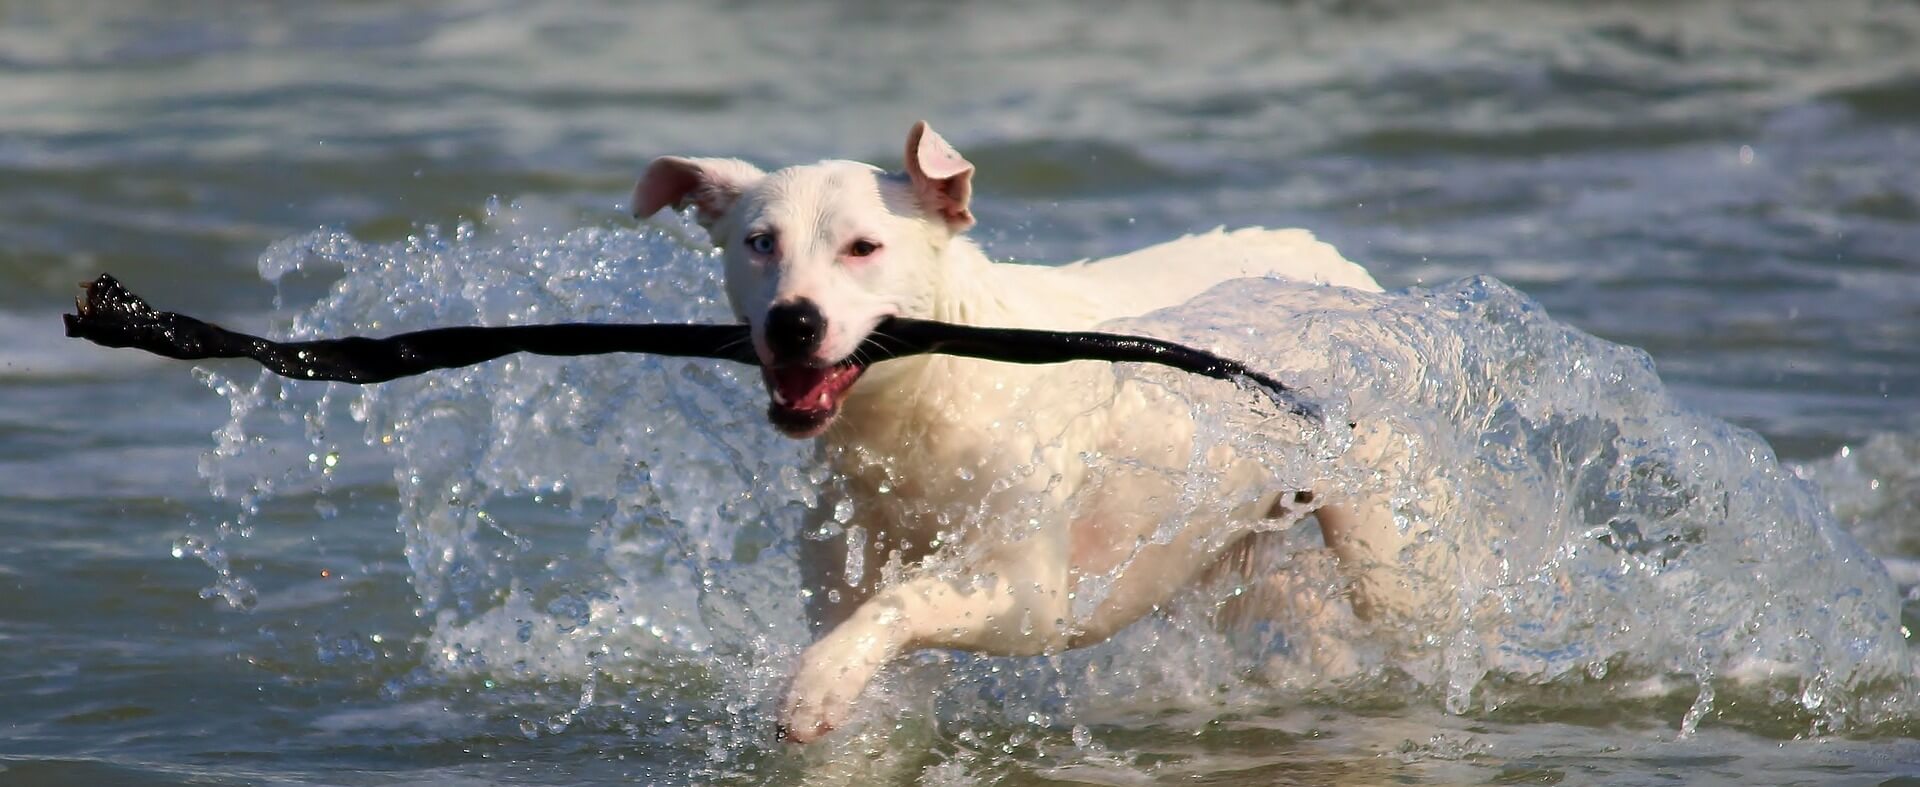 Dogs who swim may be prone to ear infections